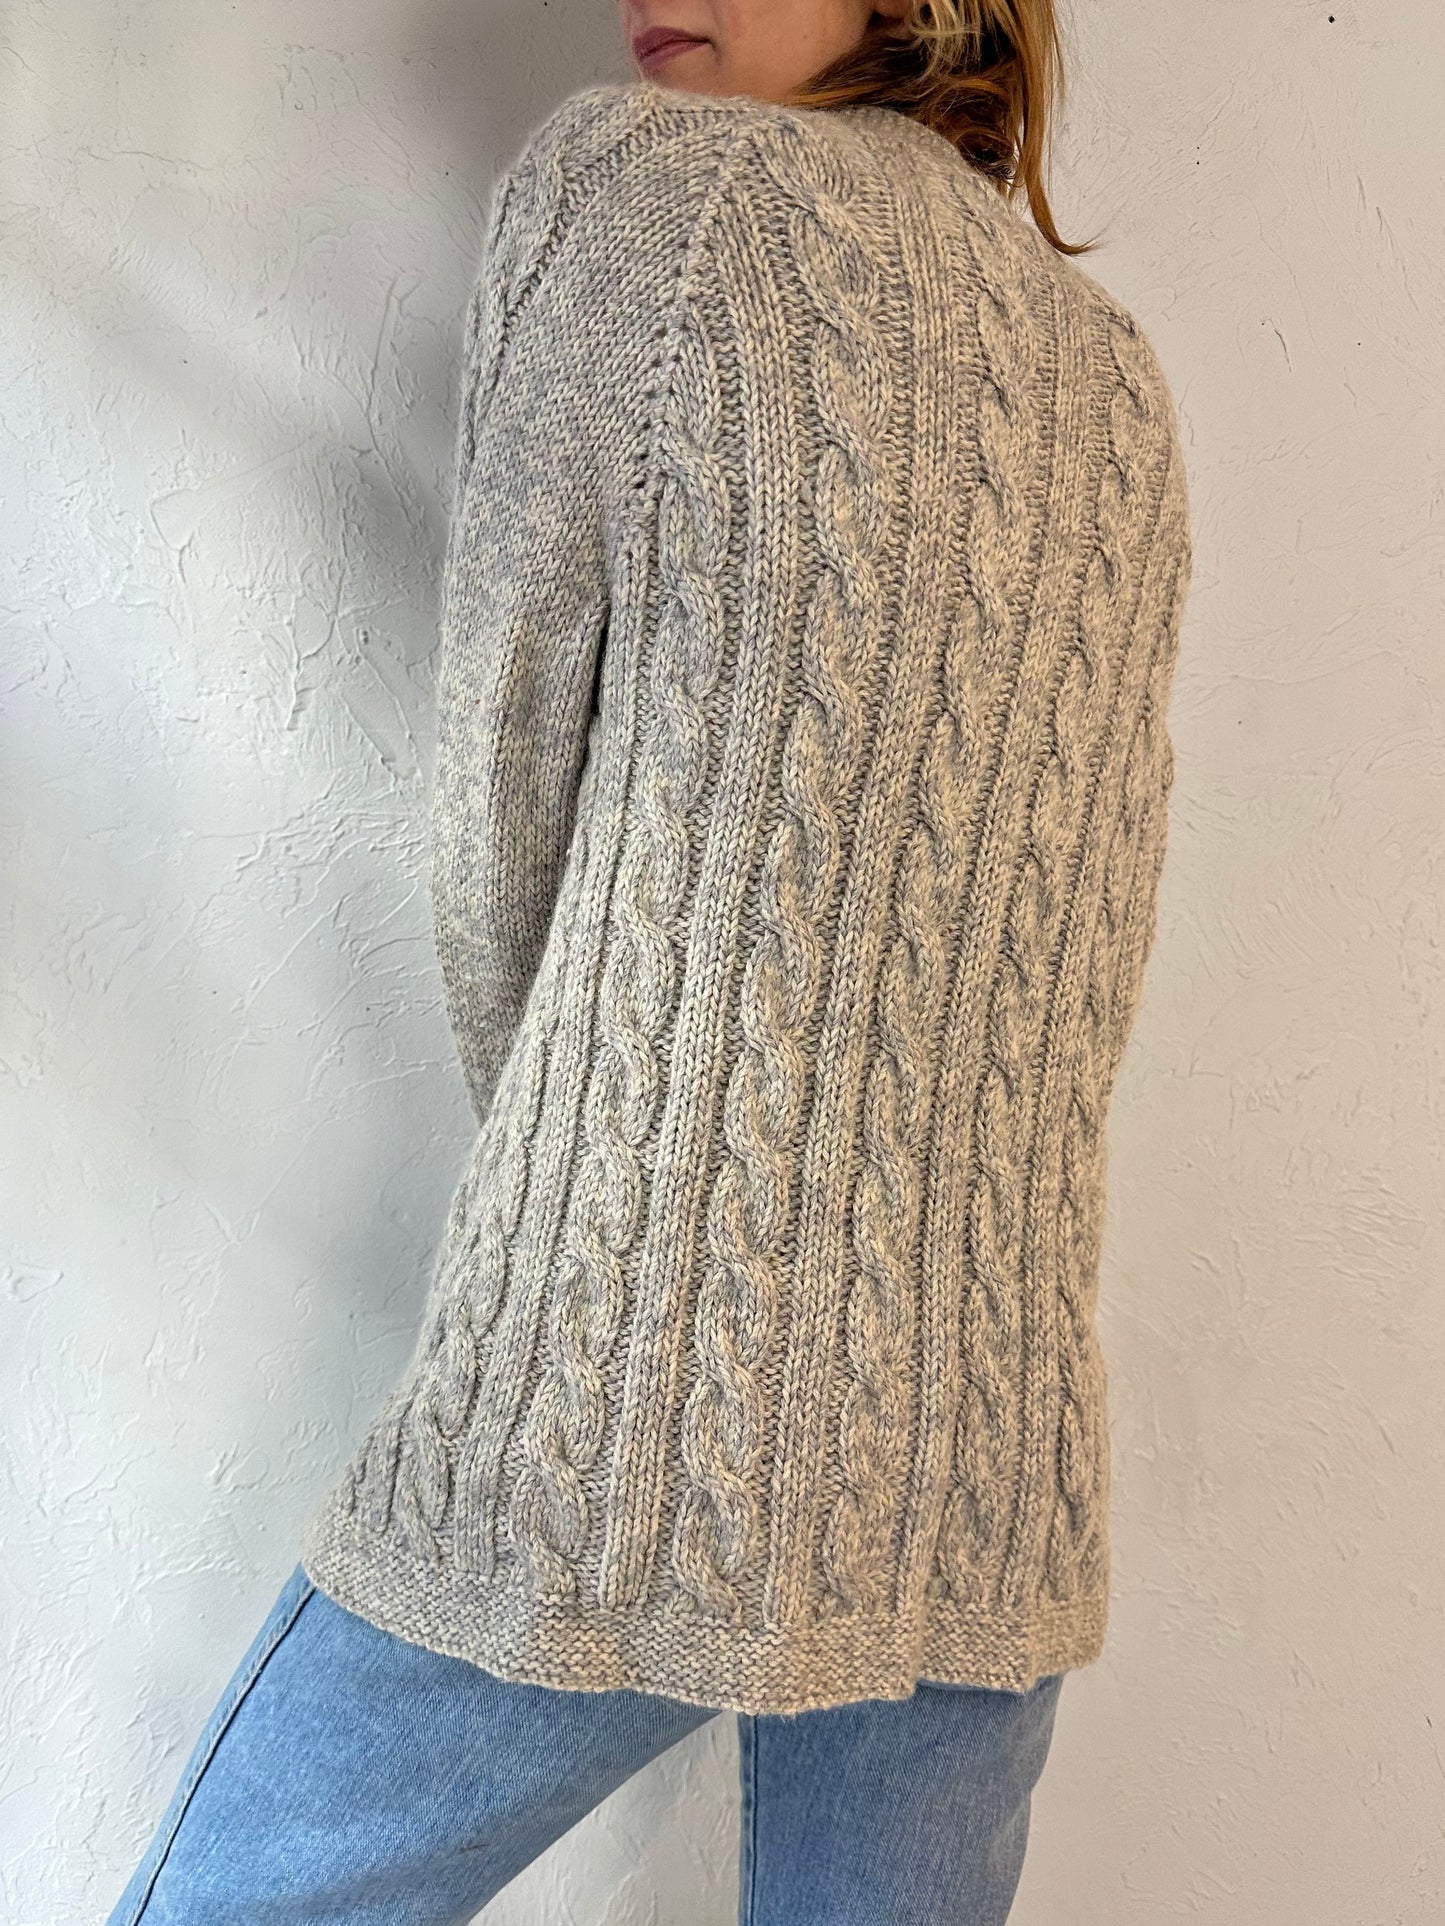 Vintage Hand Knit Gray Cable Knit Cardigan Sweater / Small